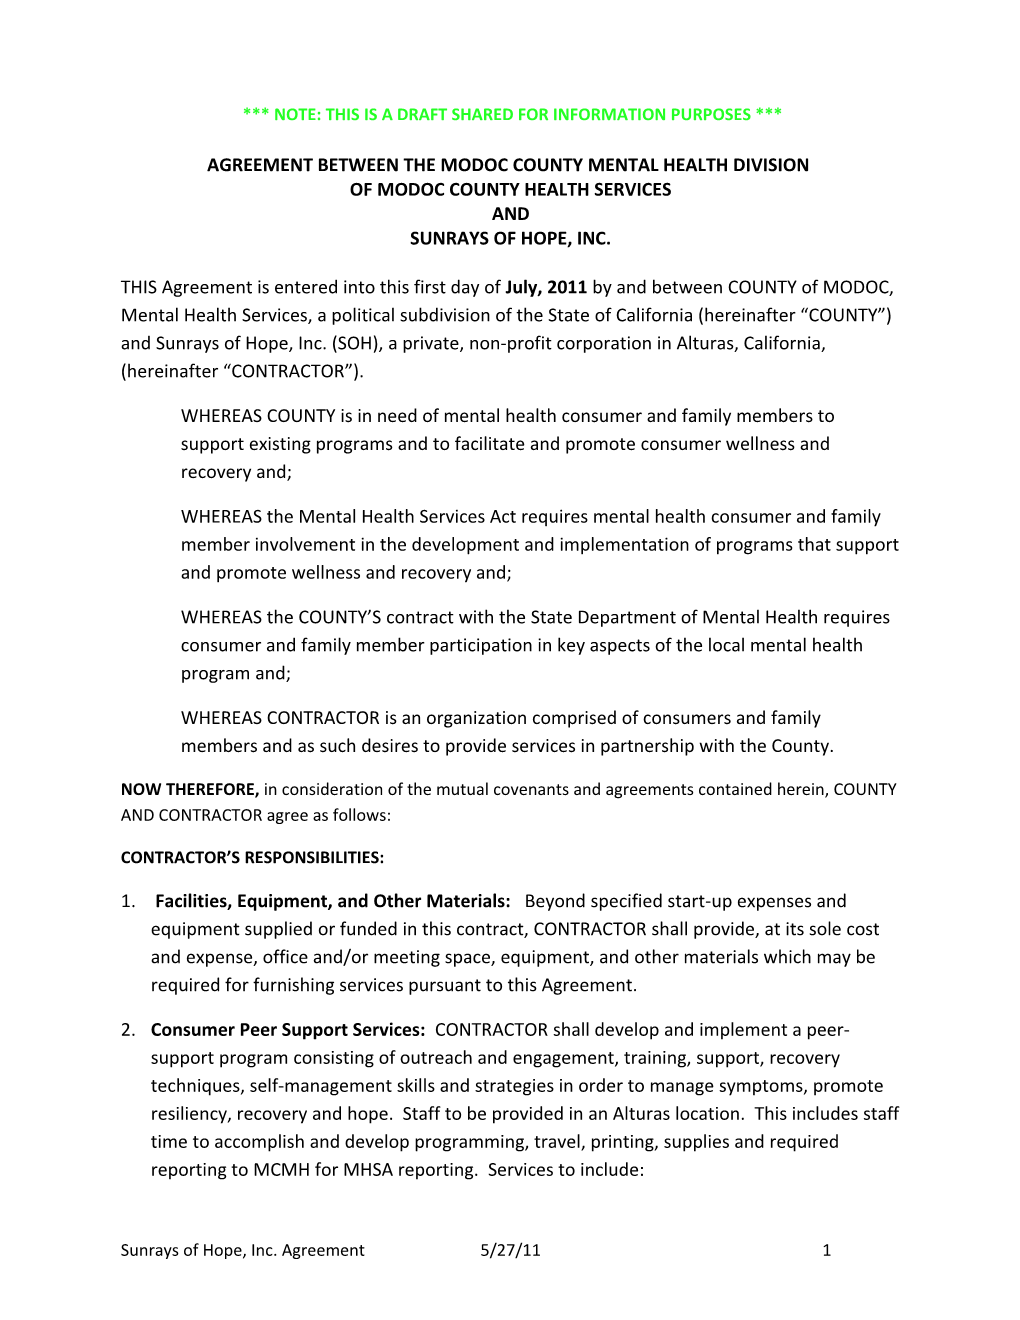 Agreement Between the Modoc County Mental Health Division